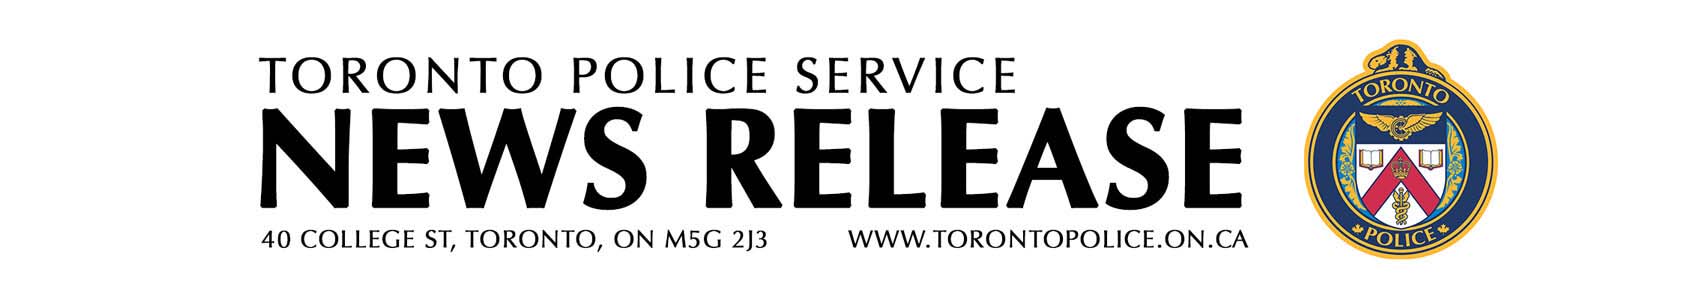 Toronto Police Service News Release title banner with the Serivce's address, website, and logo.